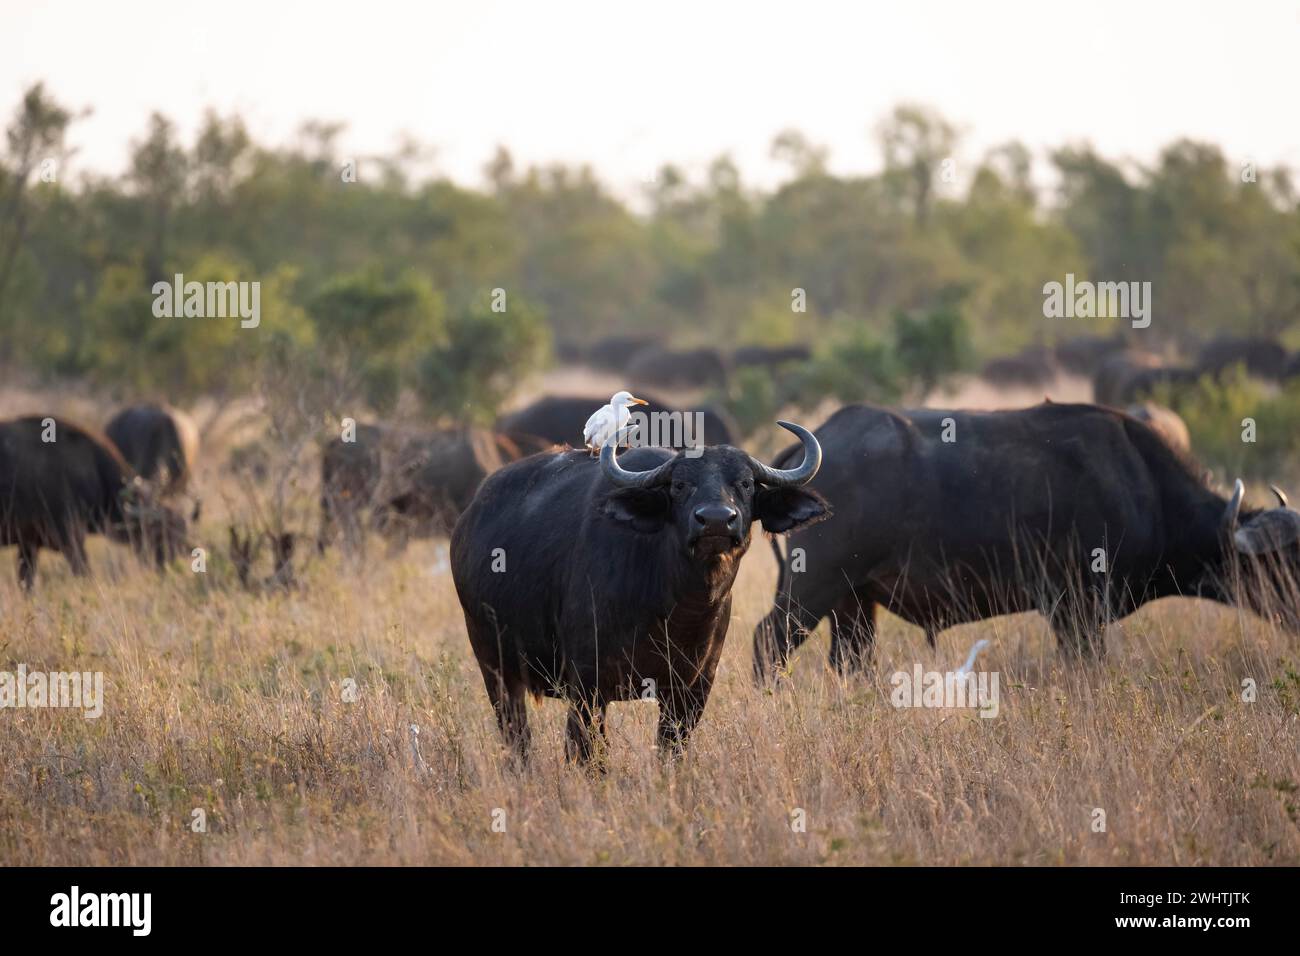 Cattle egret (Bubulcus ibis) sitting on the back of a african buffalo (Syncerus caffer caffer), bull standing in dry grass, African savannah, funny Stock Photo